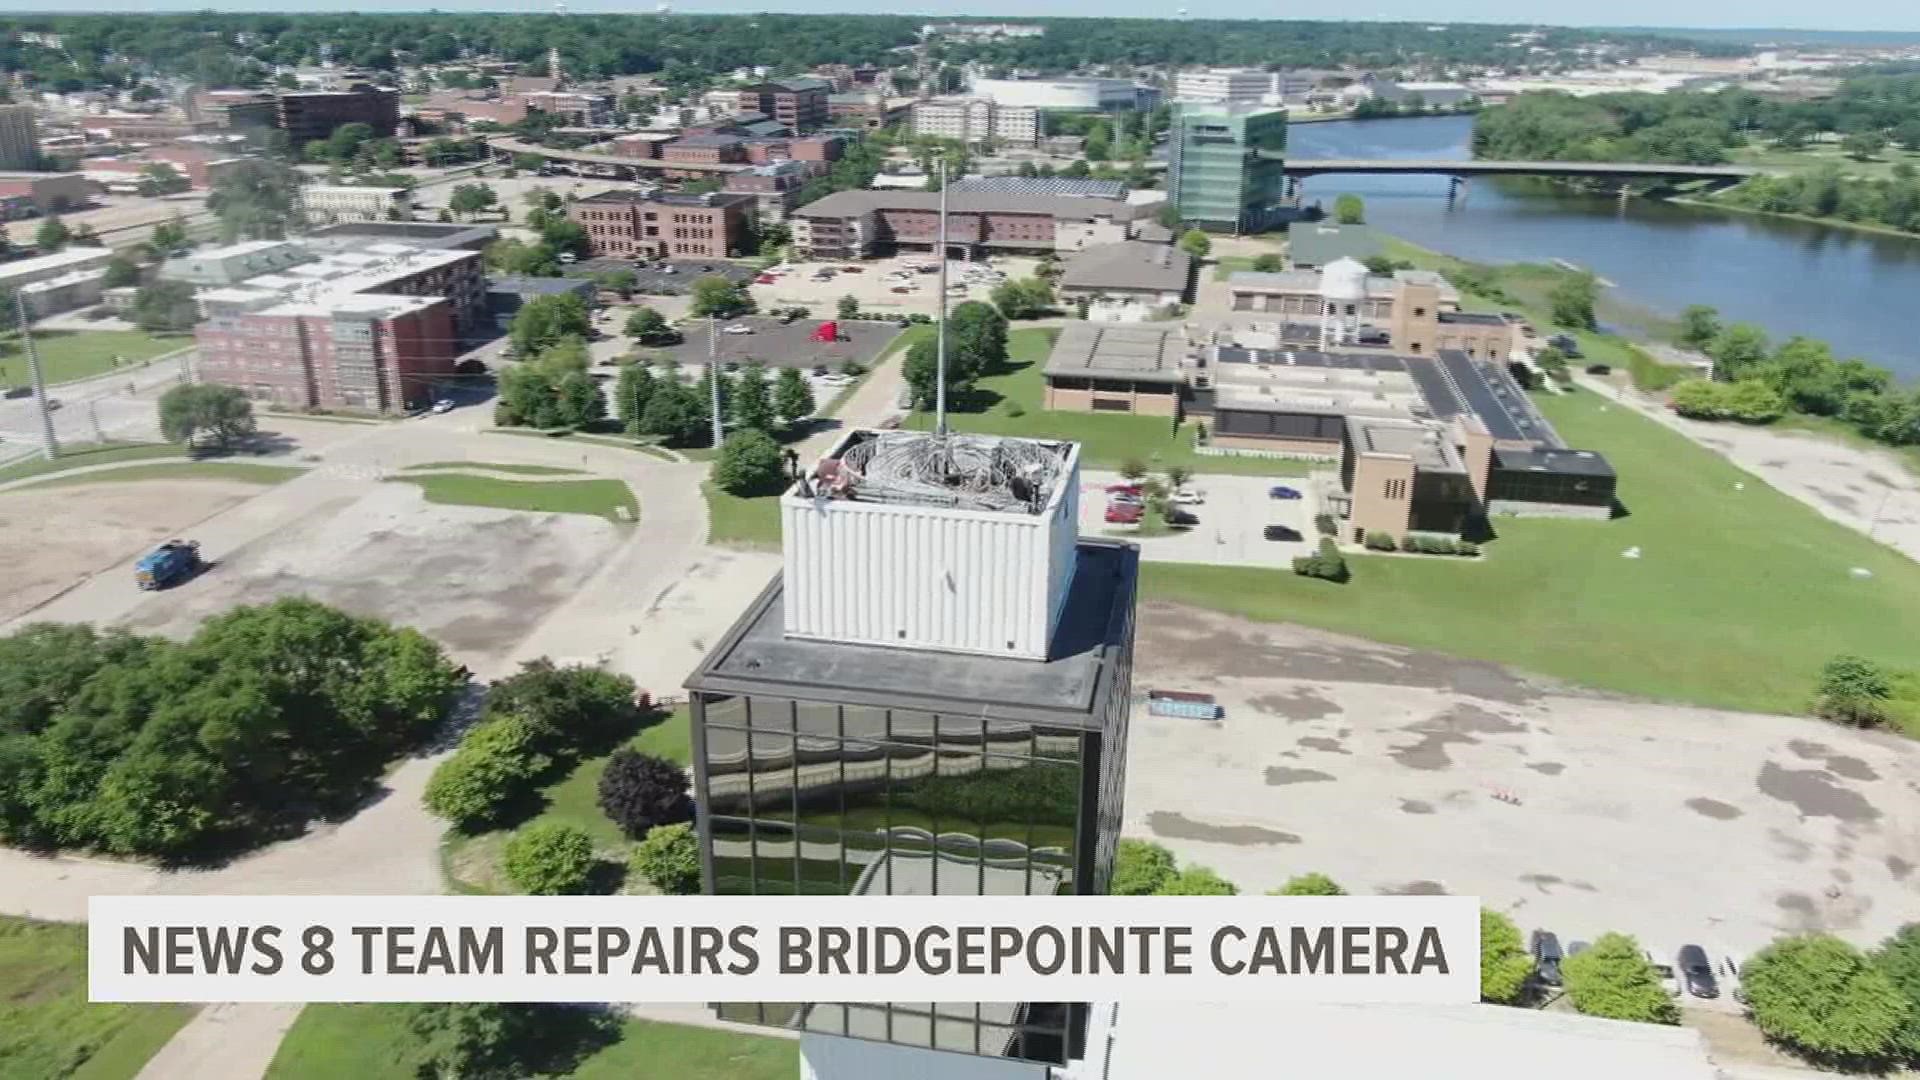 Crew members climbed roughly 14 stories into the air to make repairs to our WQAD traffic and weather cam. Our drone captured their work, high in the sky.